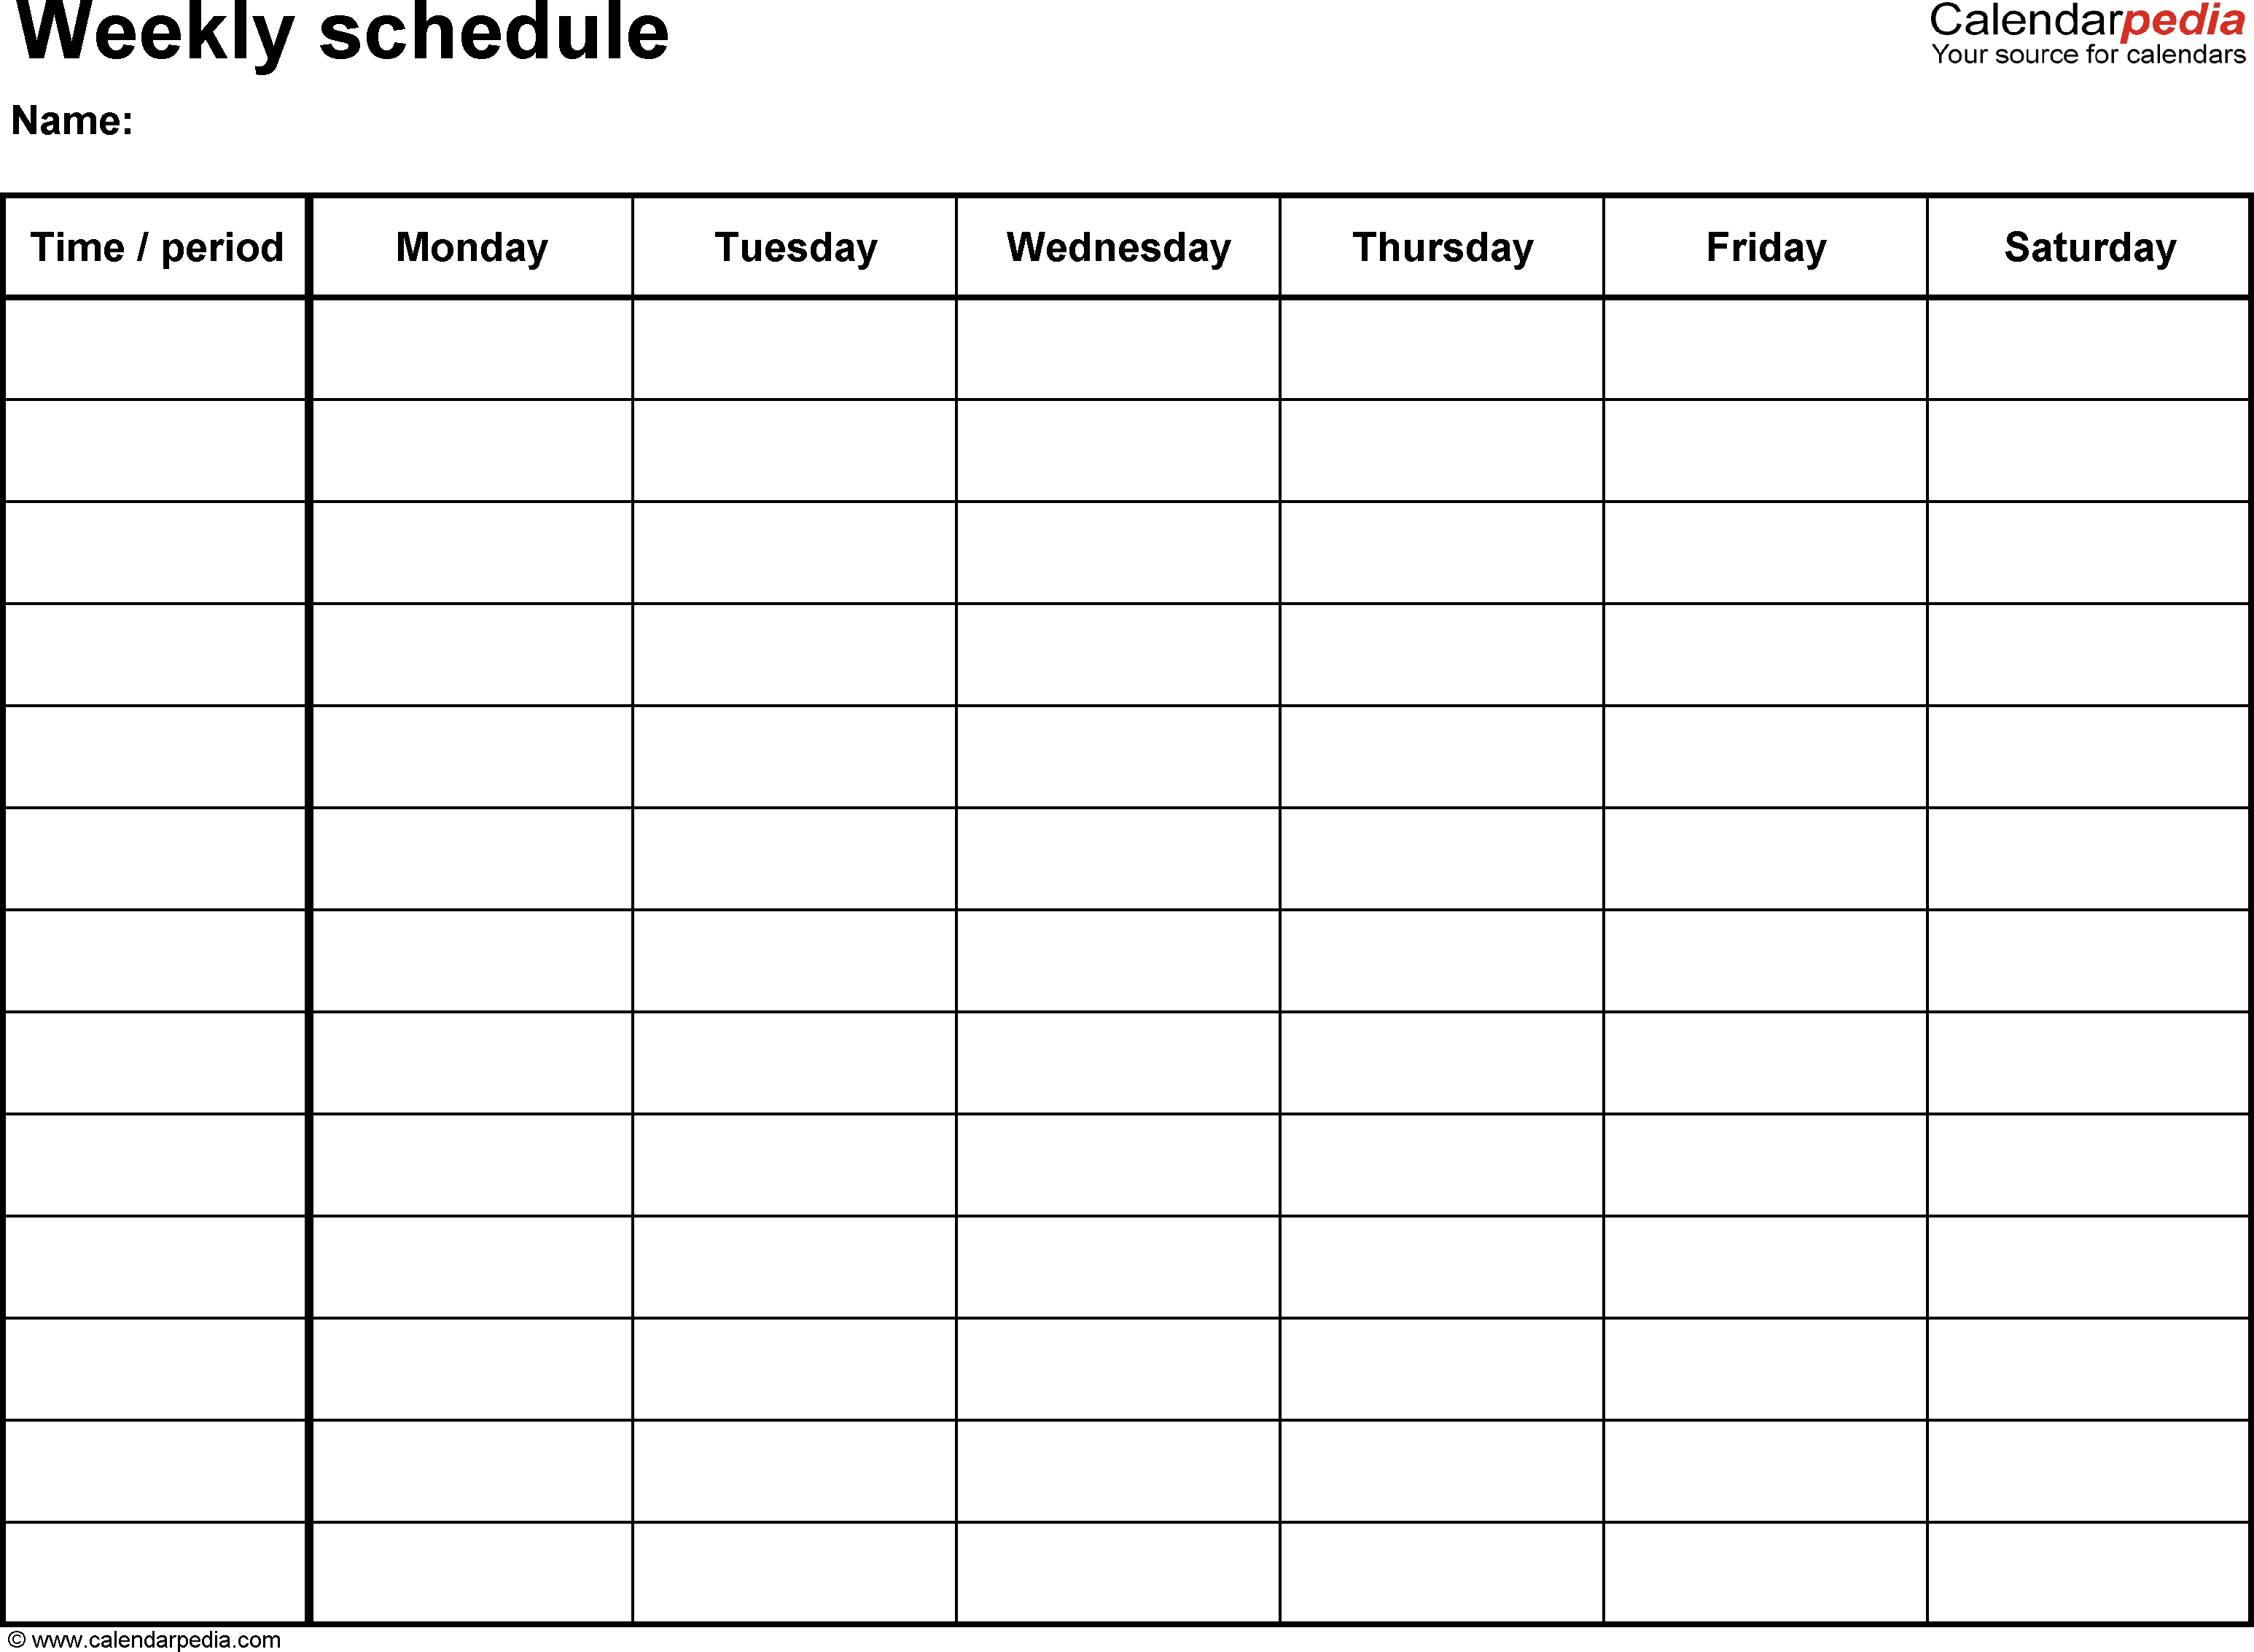 Free Weekly Schedule Templates For Excel - 18 Templates intended for Printable Monthly Calendar Template Monday Through Friday